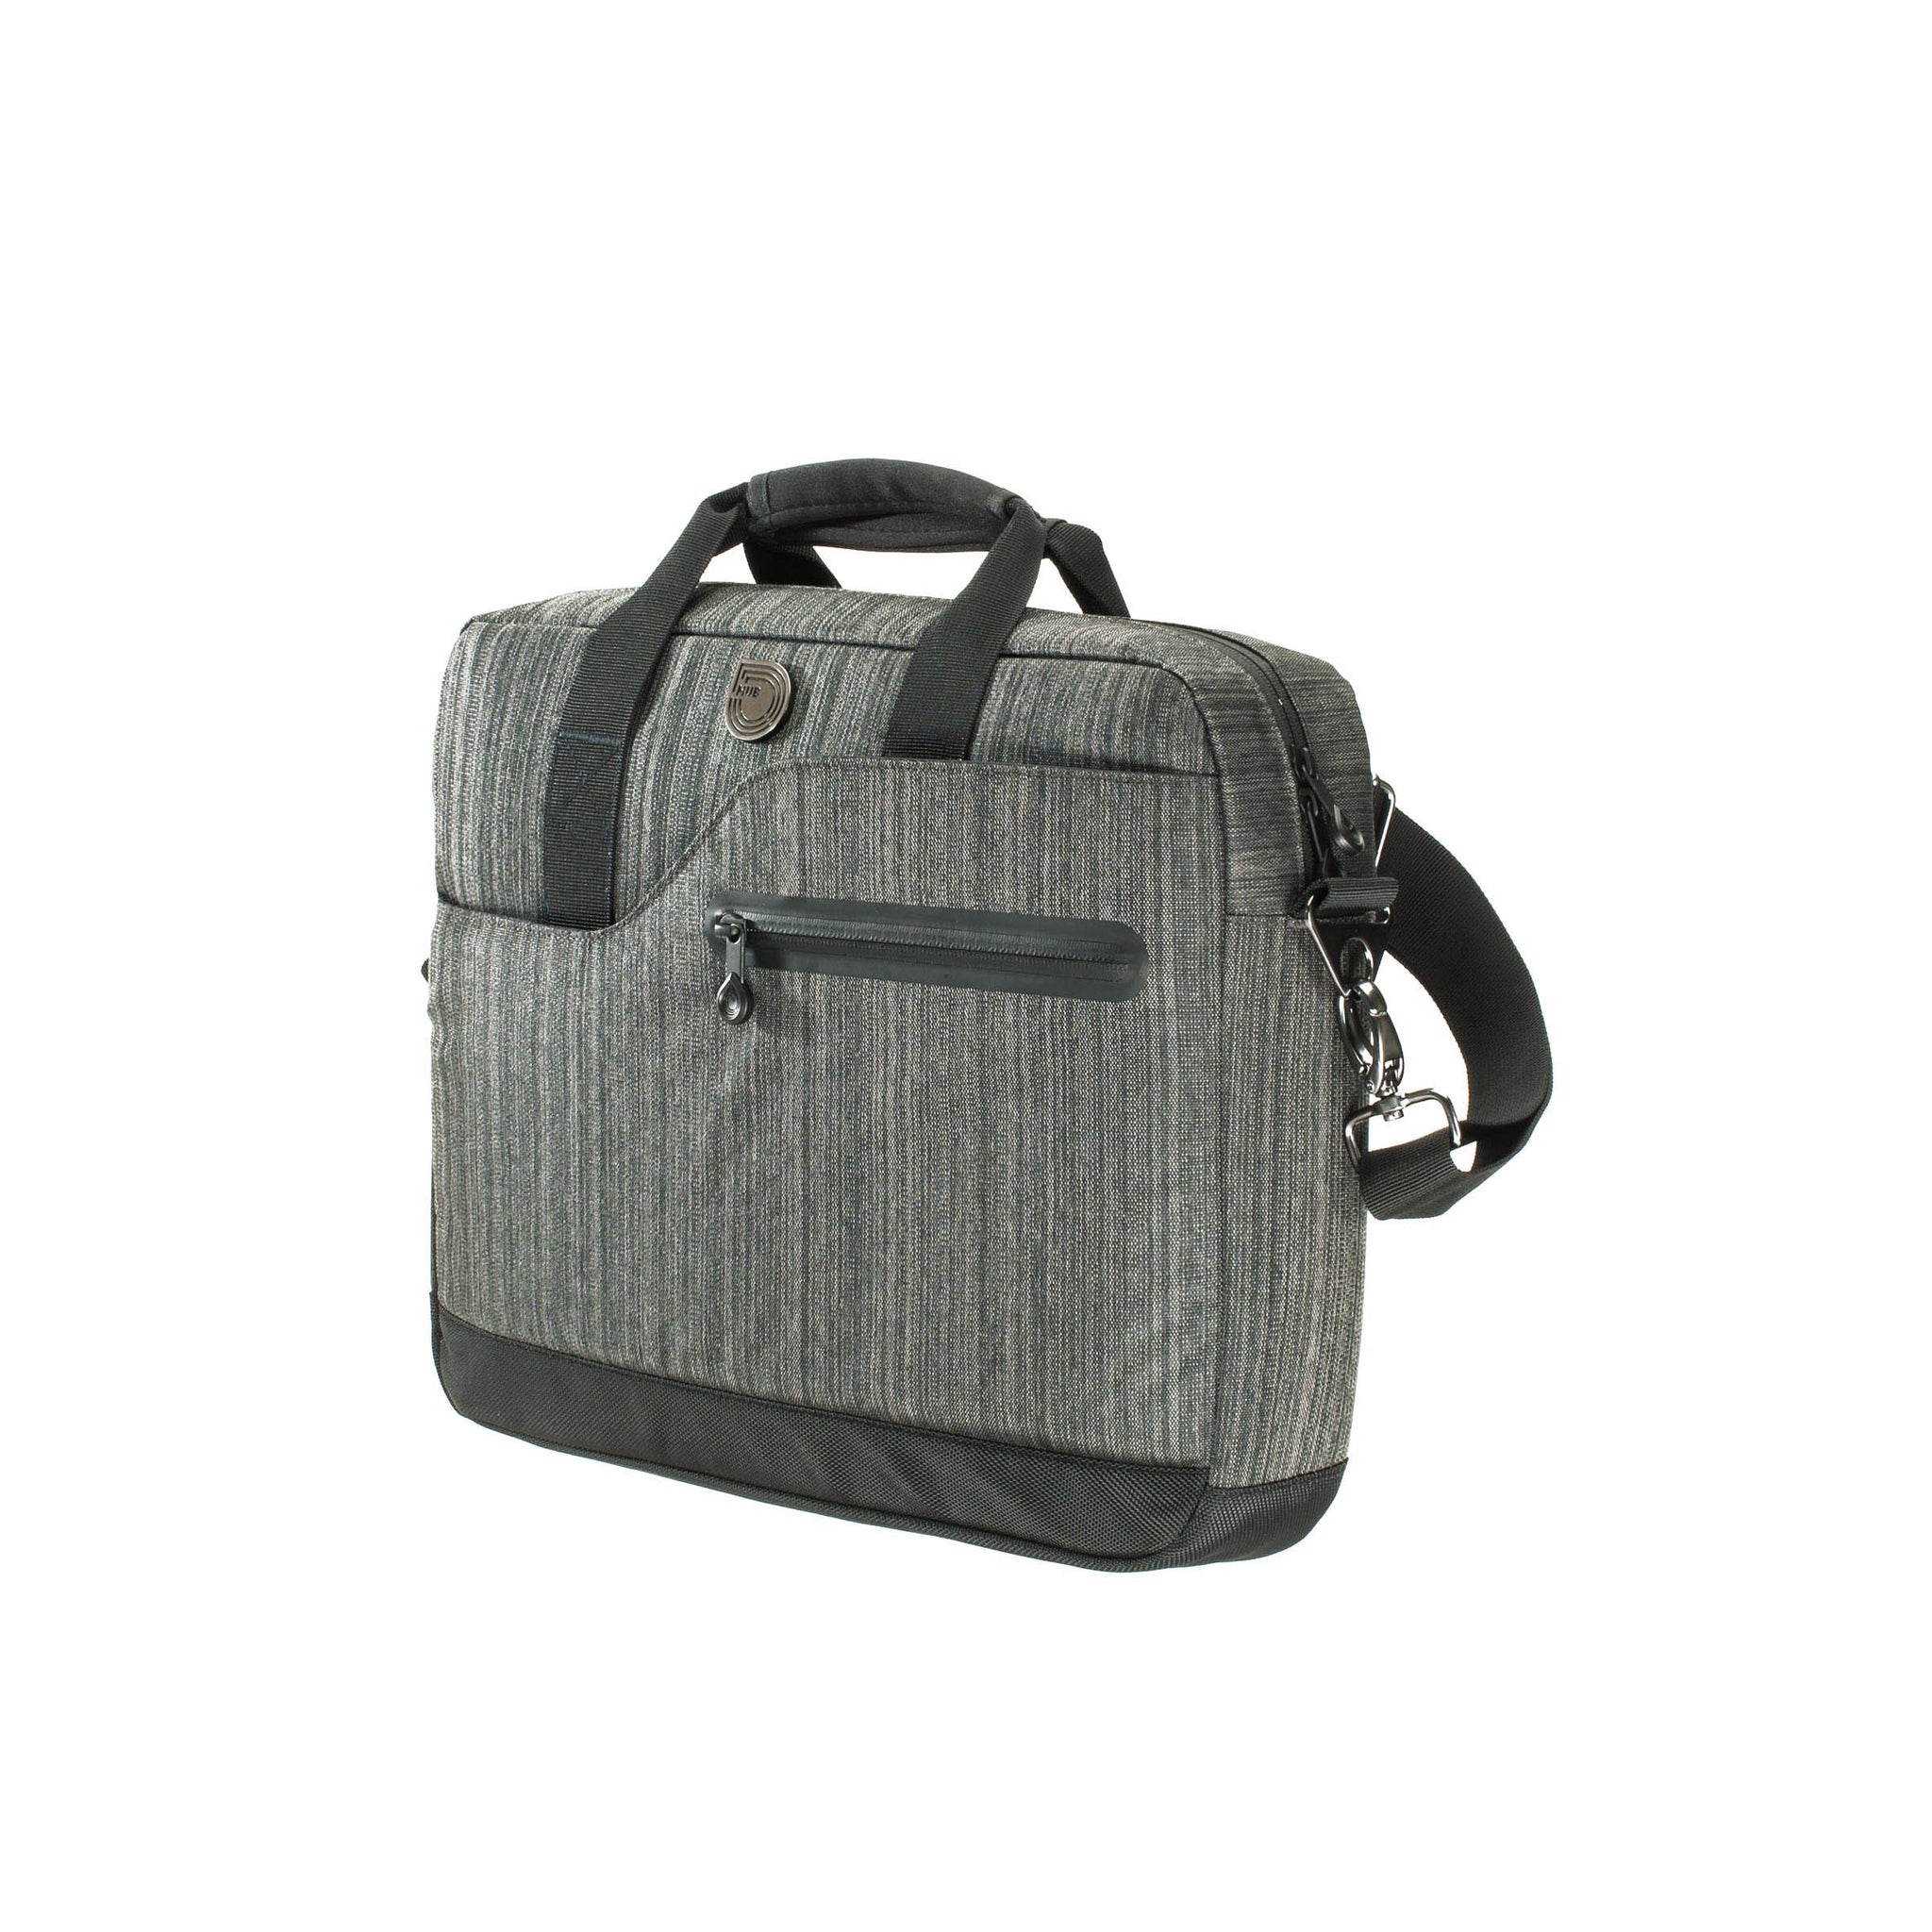 MUB PROFESSIONAL - The Anglet Business Bag for Men